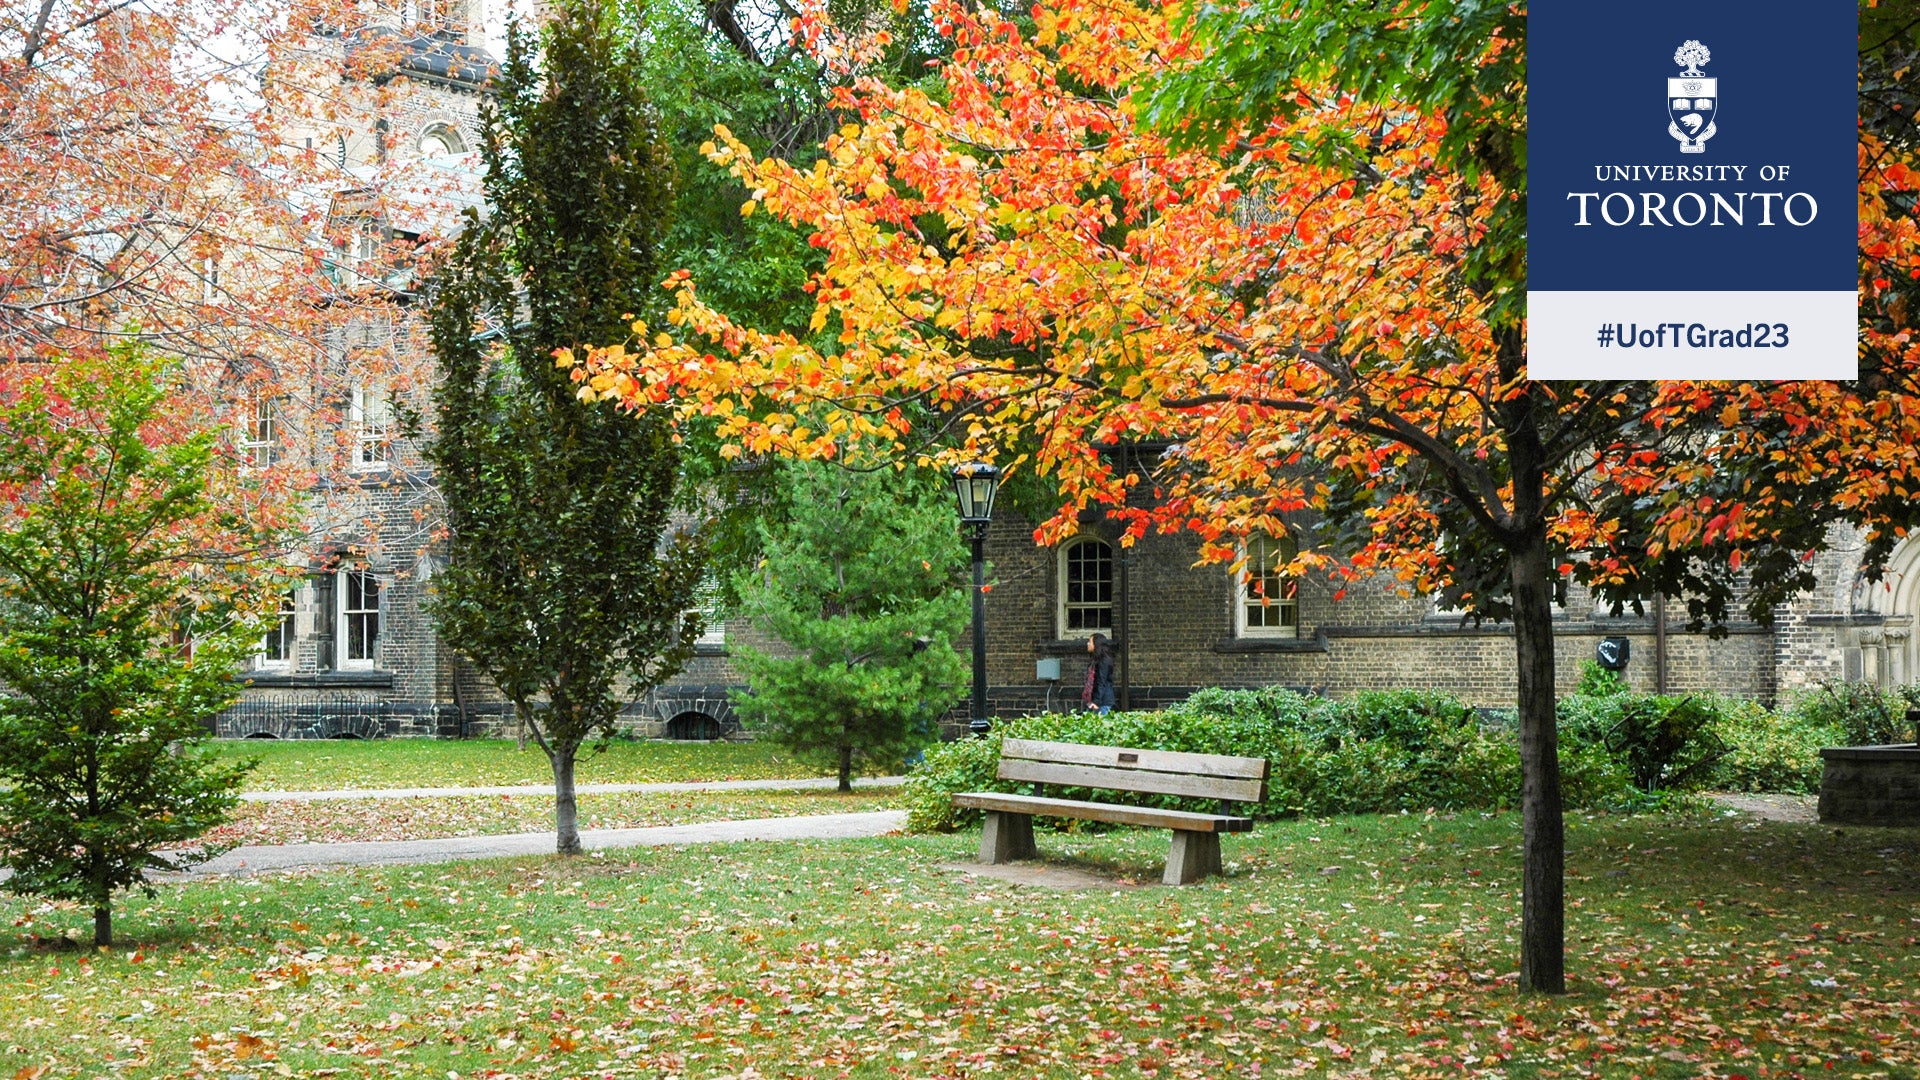 U of T St. George campus in the fall season